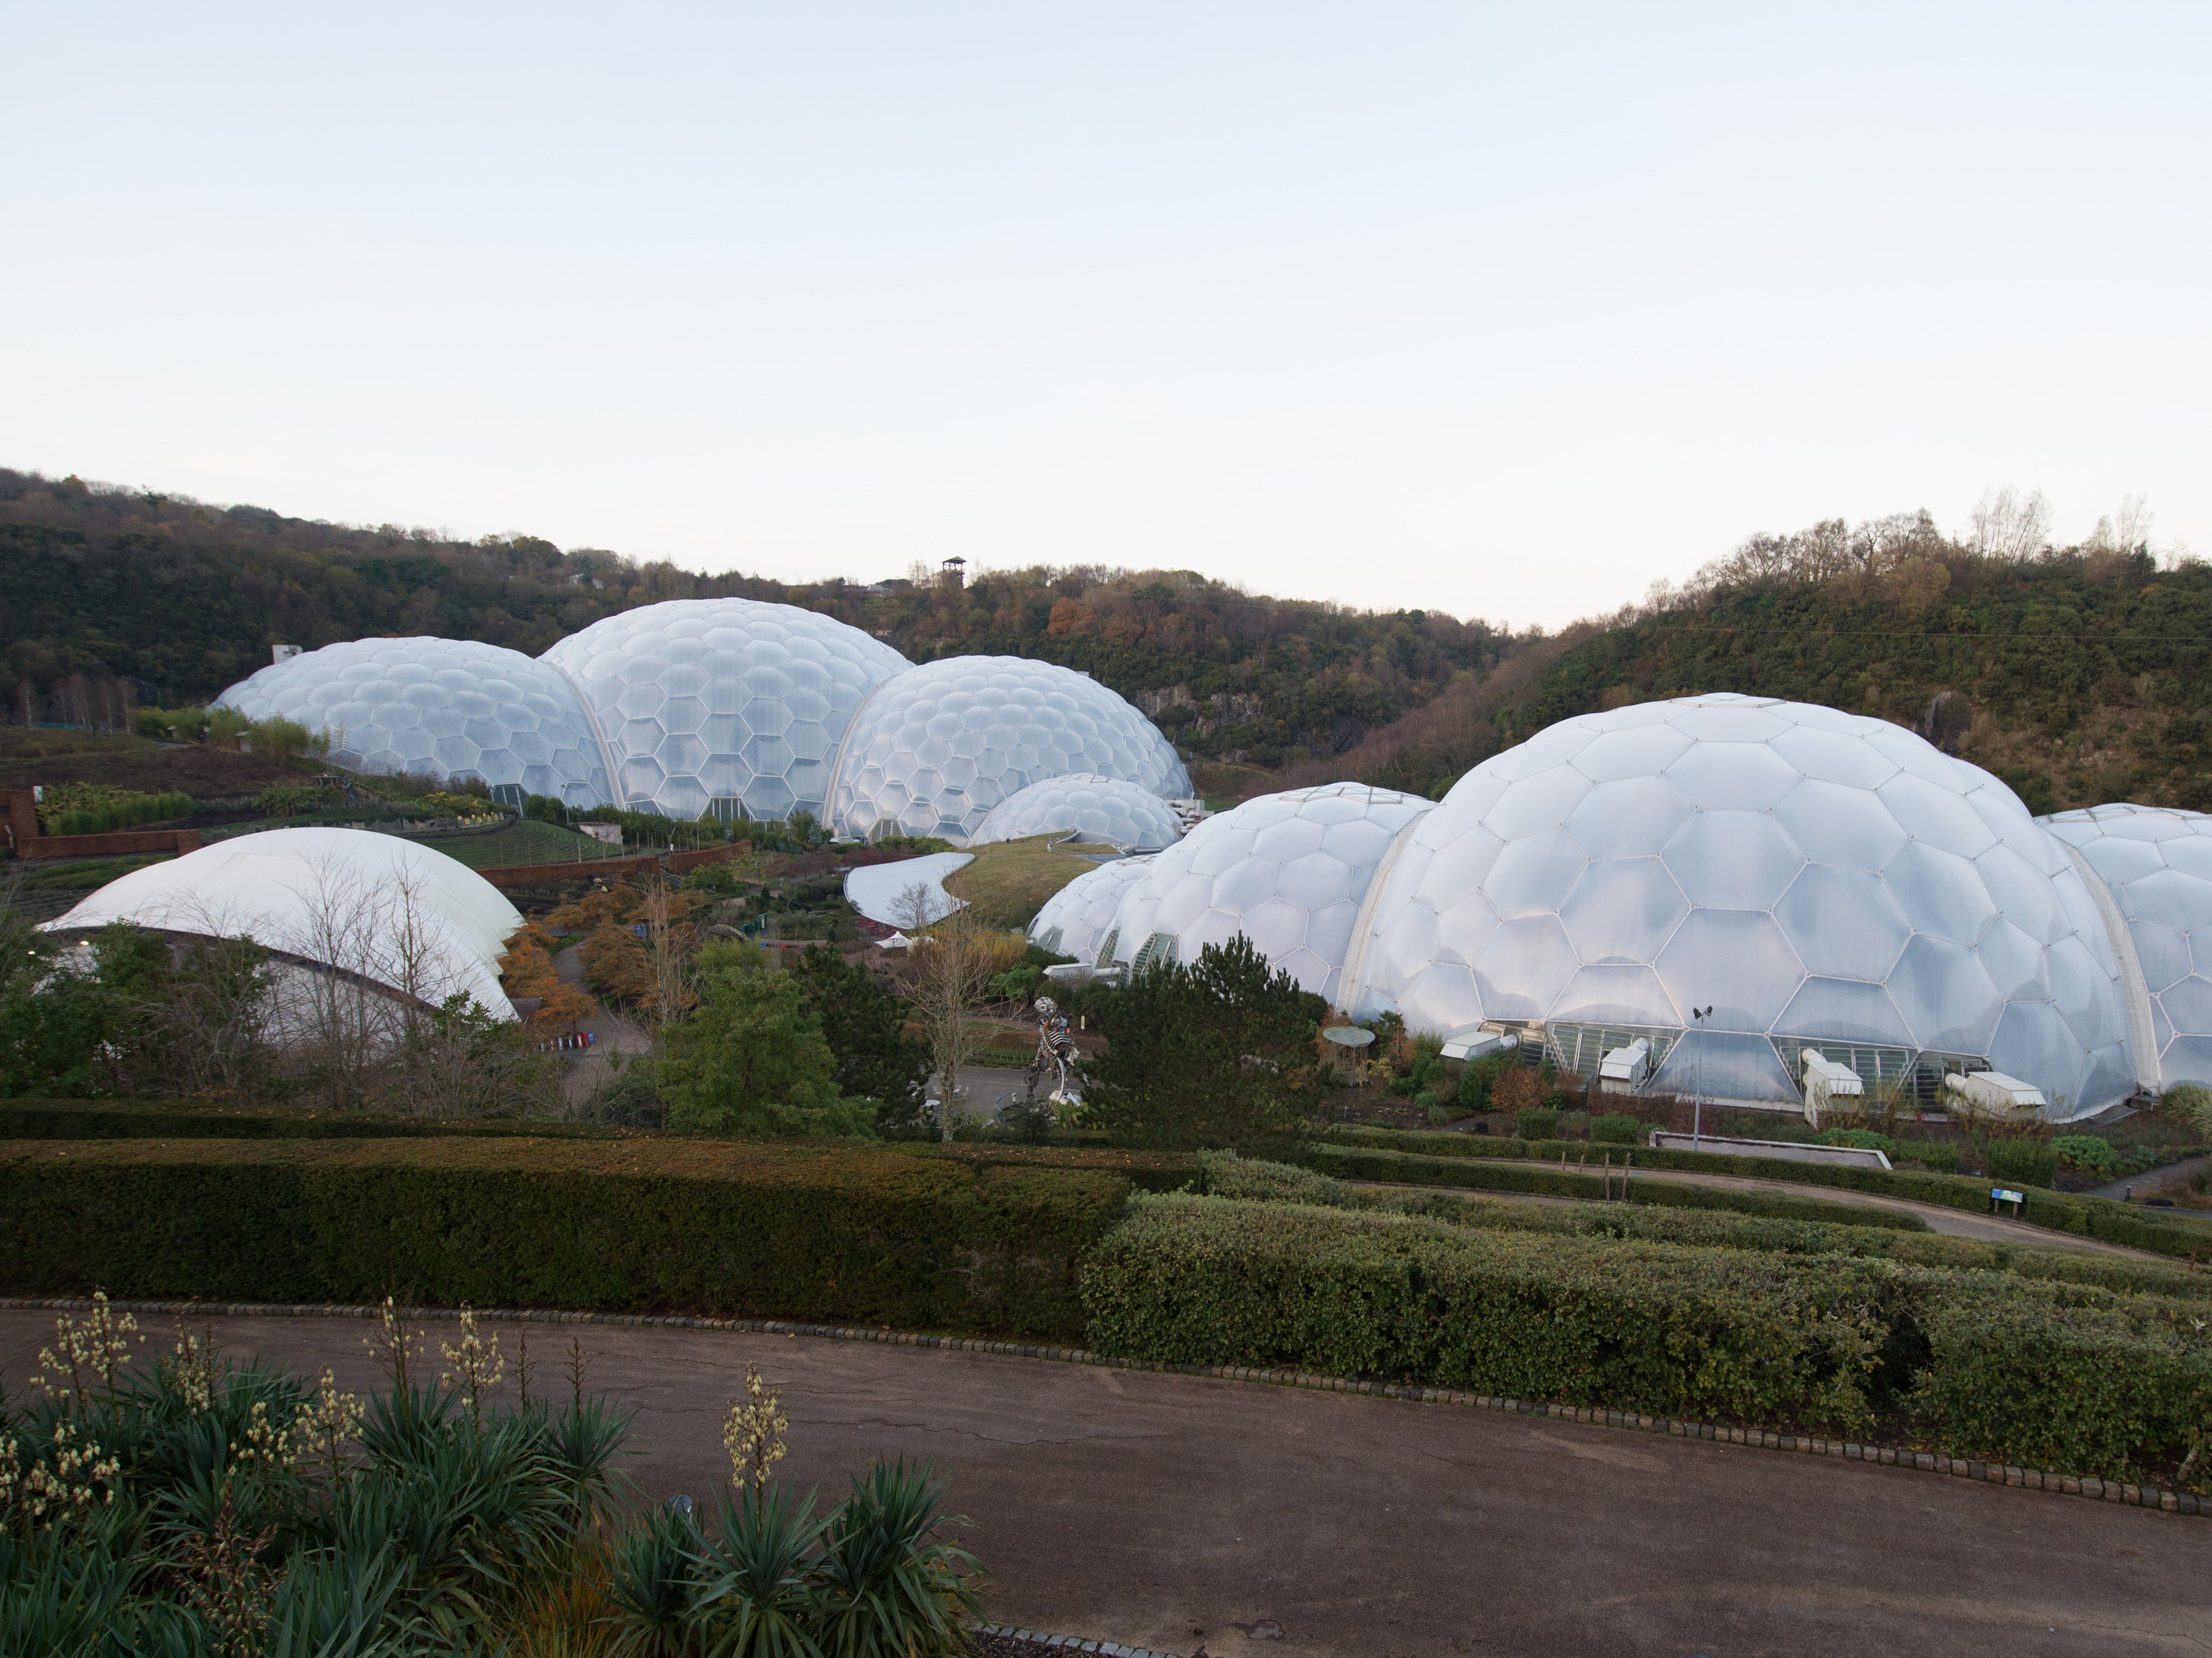 Eden Project co-founder Sir Tim Smit has insulted Cornish people by calling them inarticulate